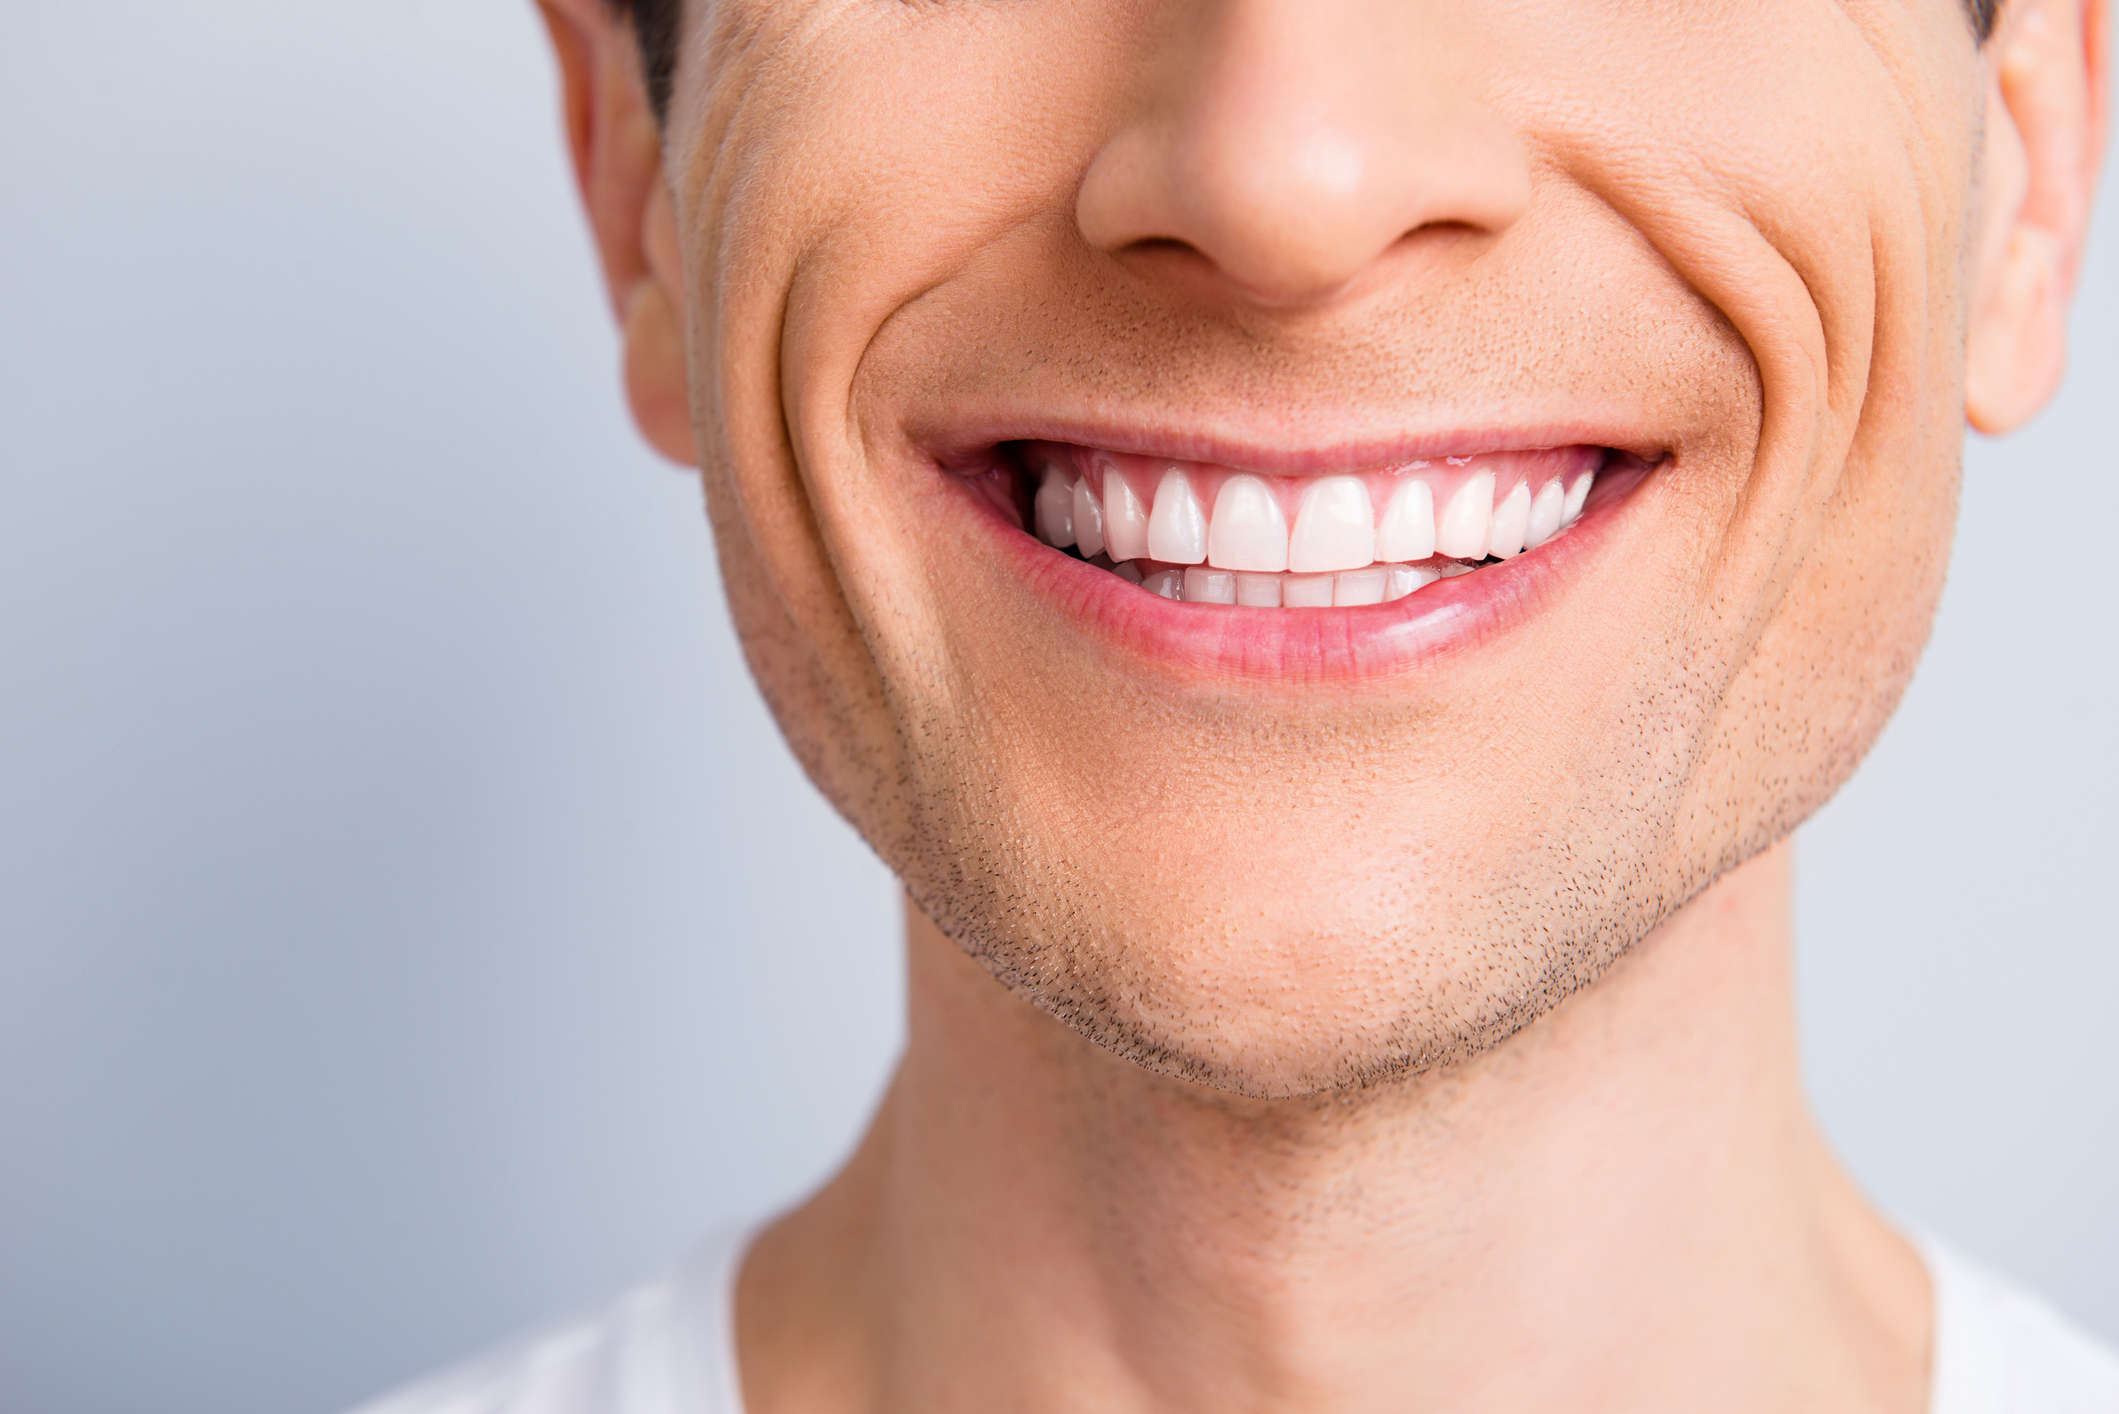 Close up cropped half face portrait of attractive, trendy, stylish, experienced, brunet, toothy man with wide beaming smile and healthy teeth